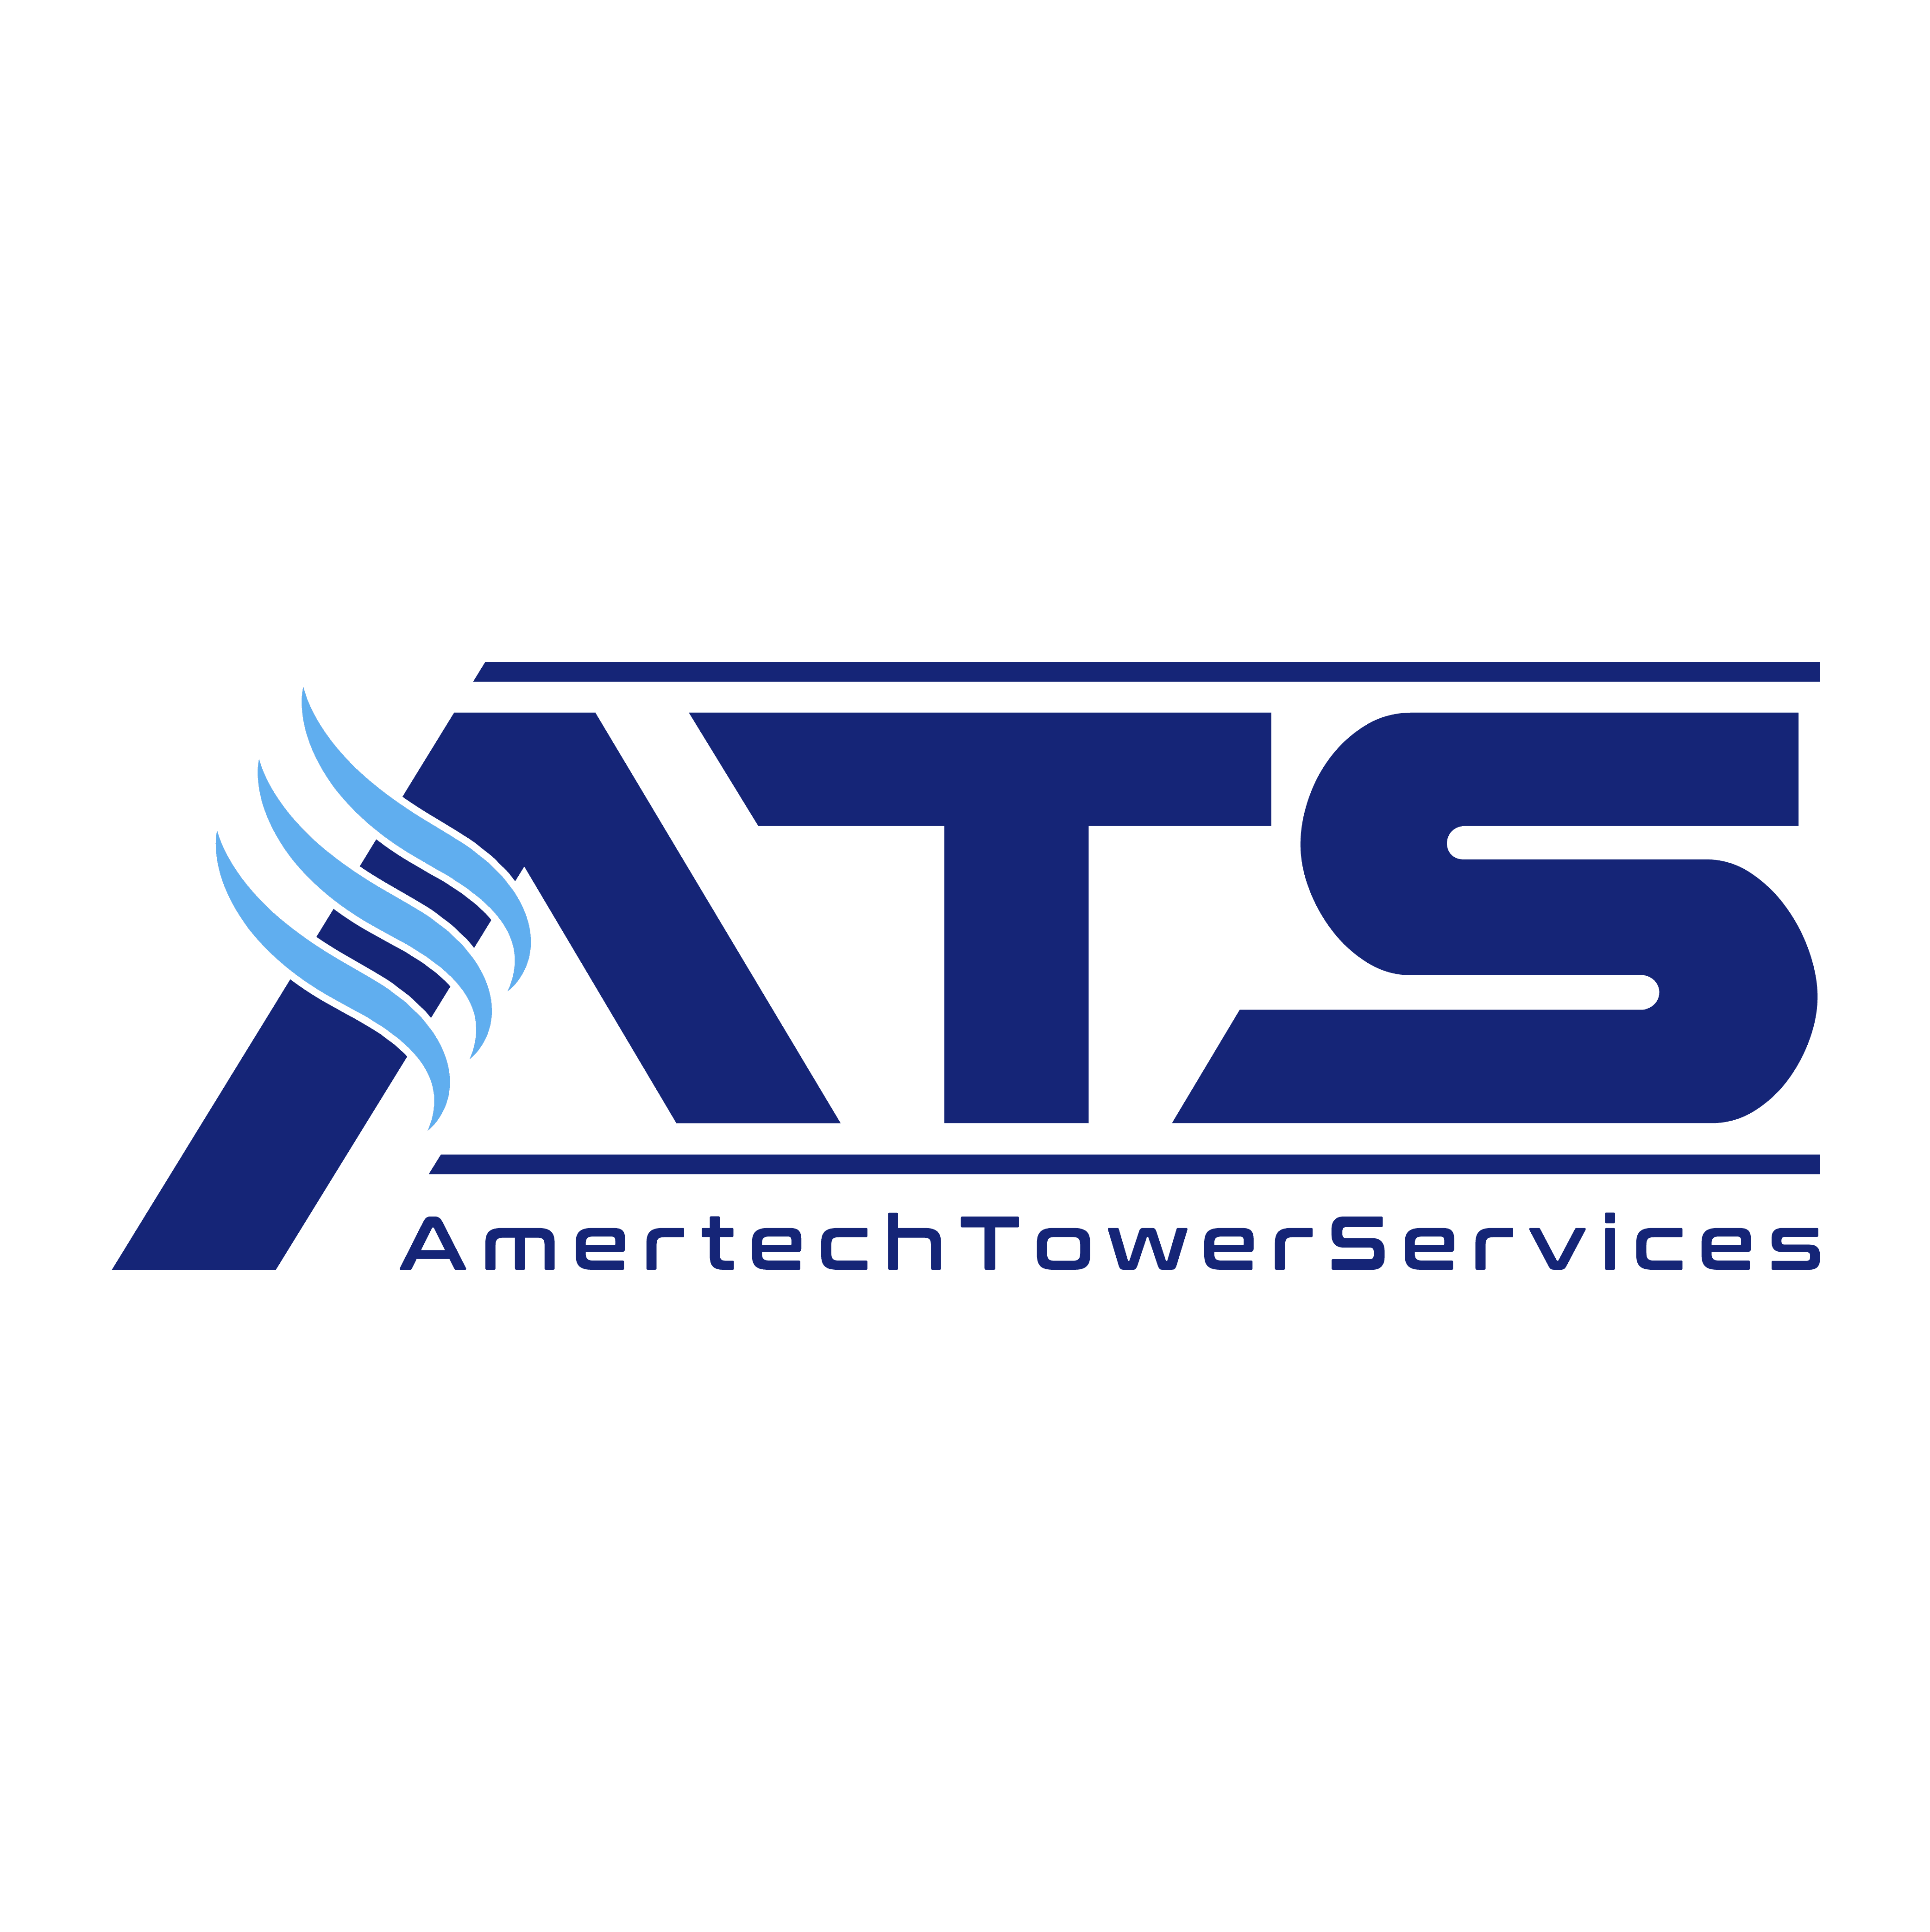 Amertech Tower Services